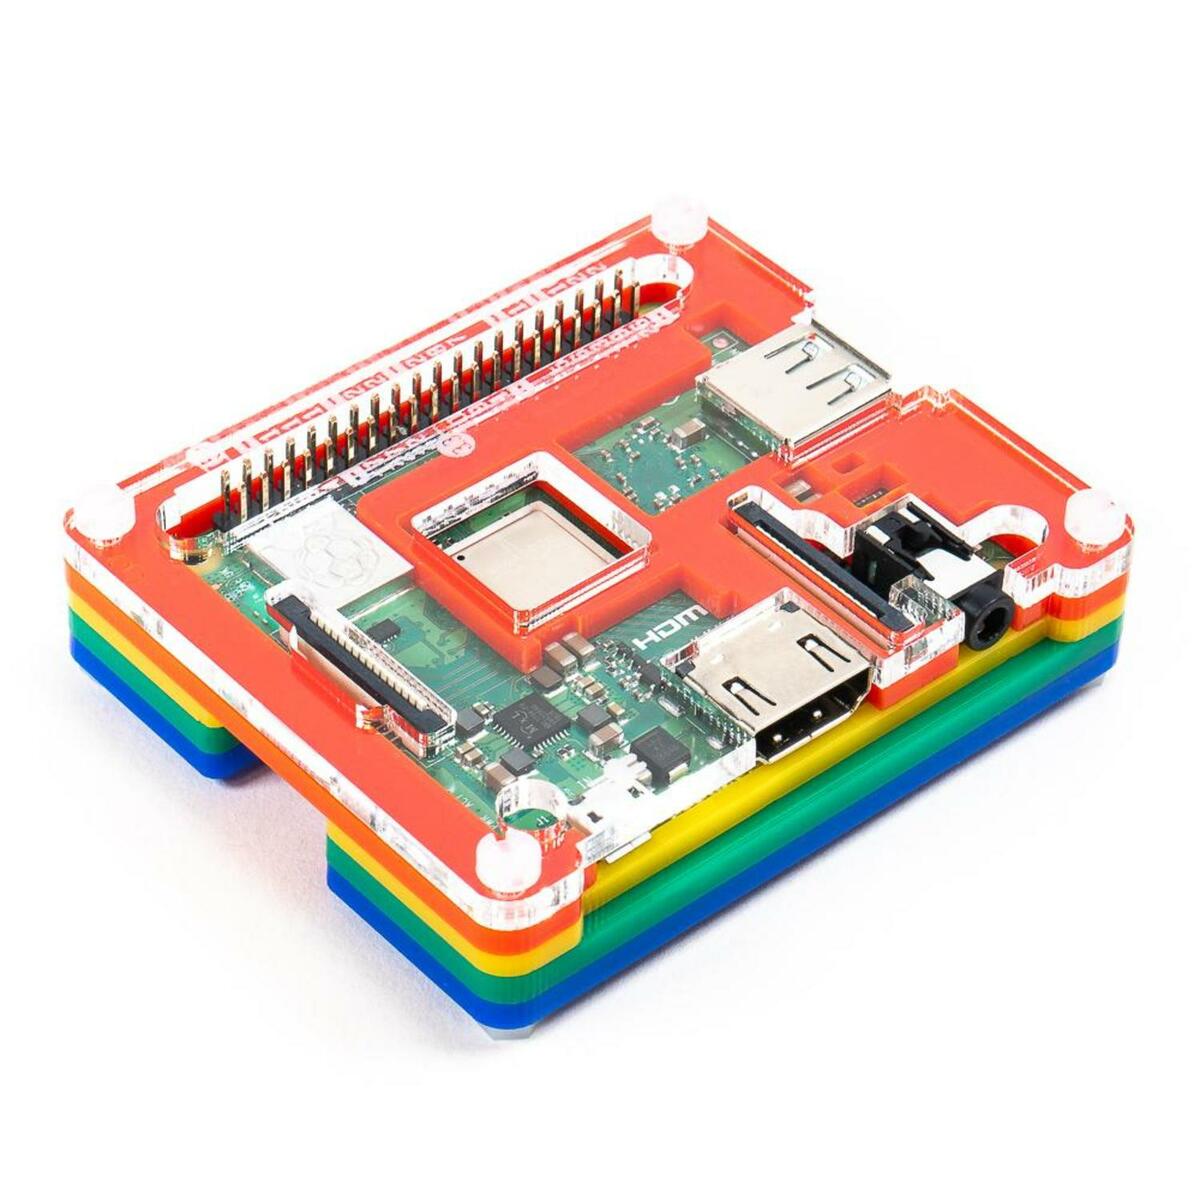 Pibow 3 A+ Coupe (for Raspberry Pi 3 A+)